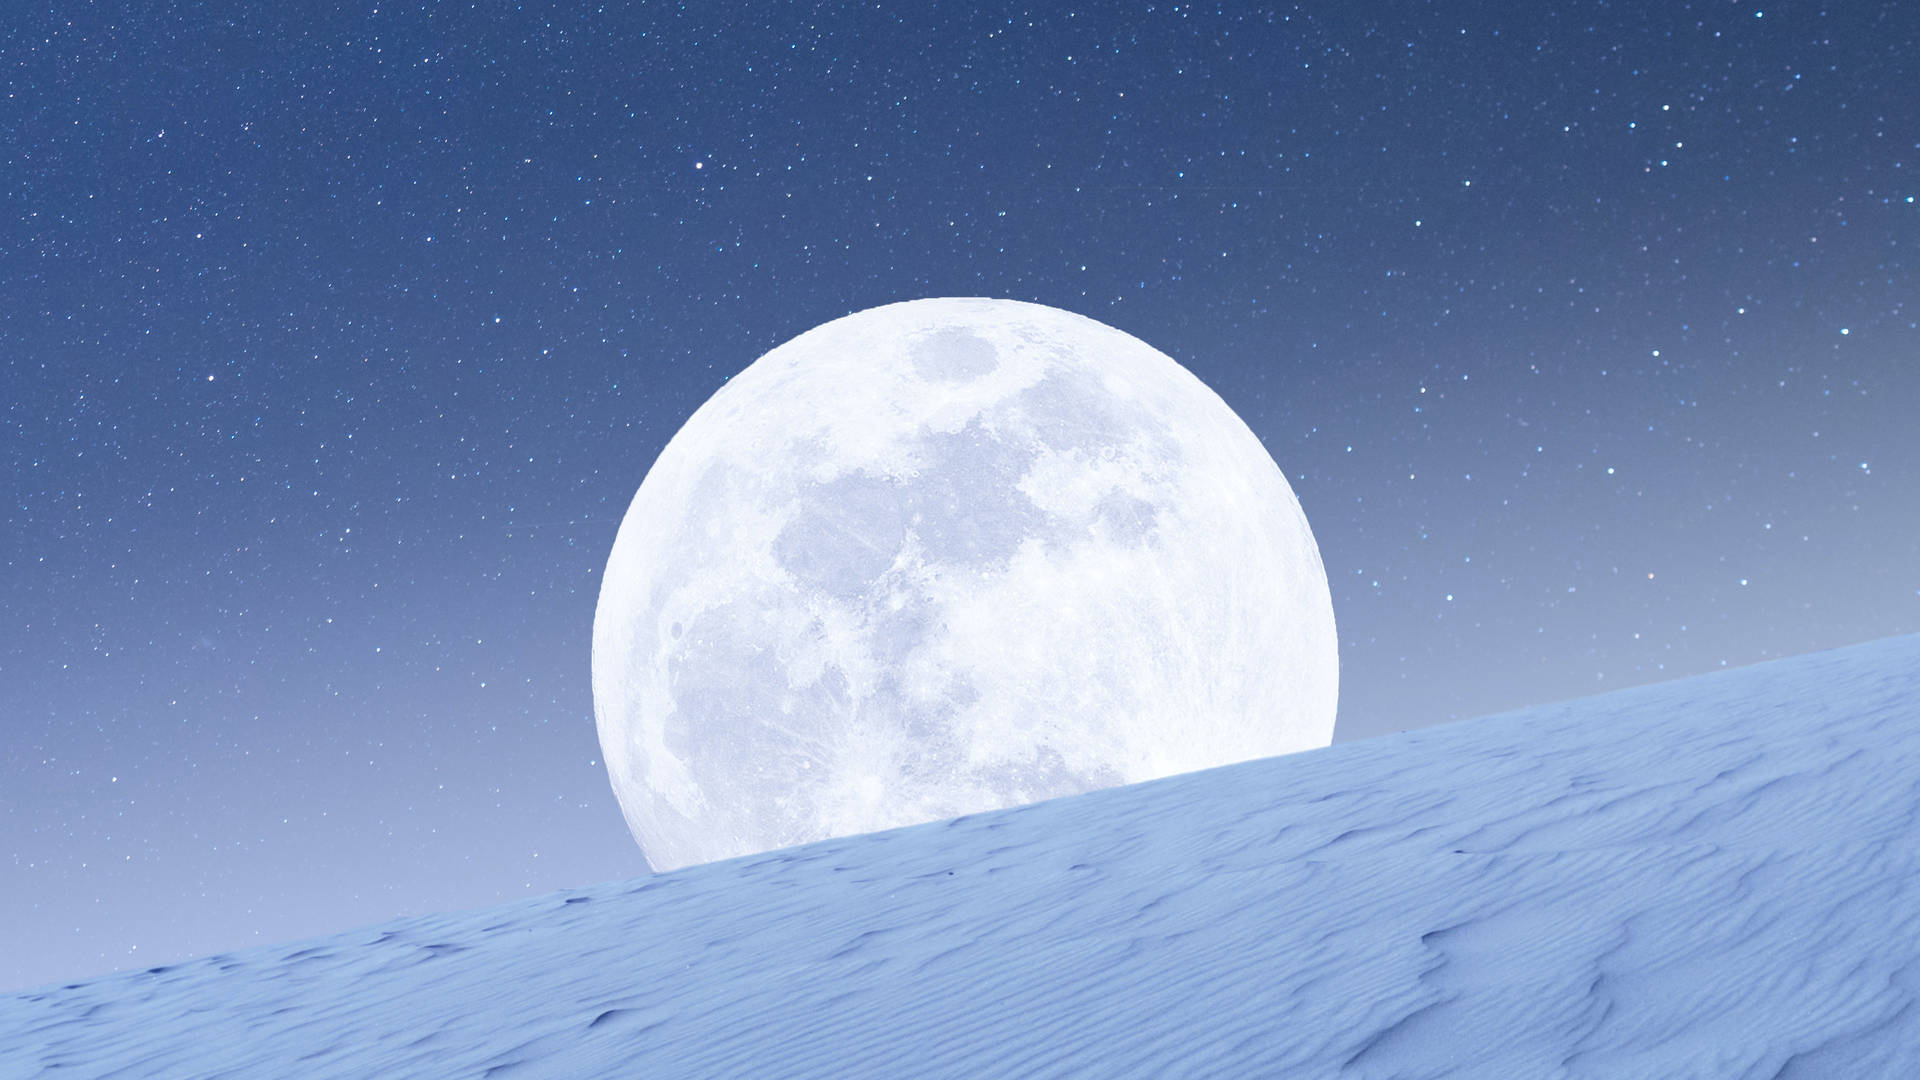 Aesthetic Moon Over The Snowy Hill Wallpaper